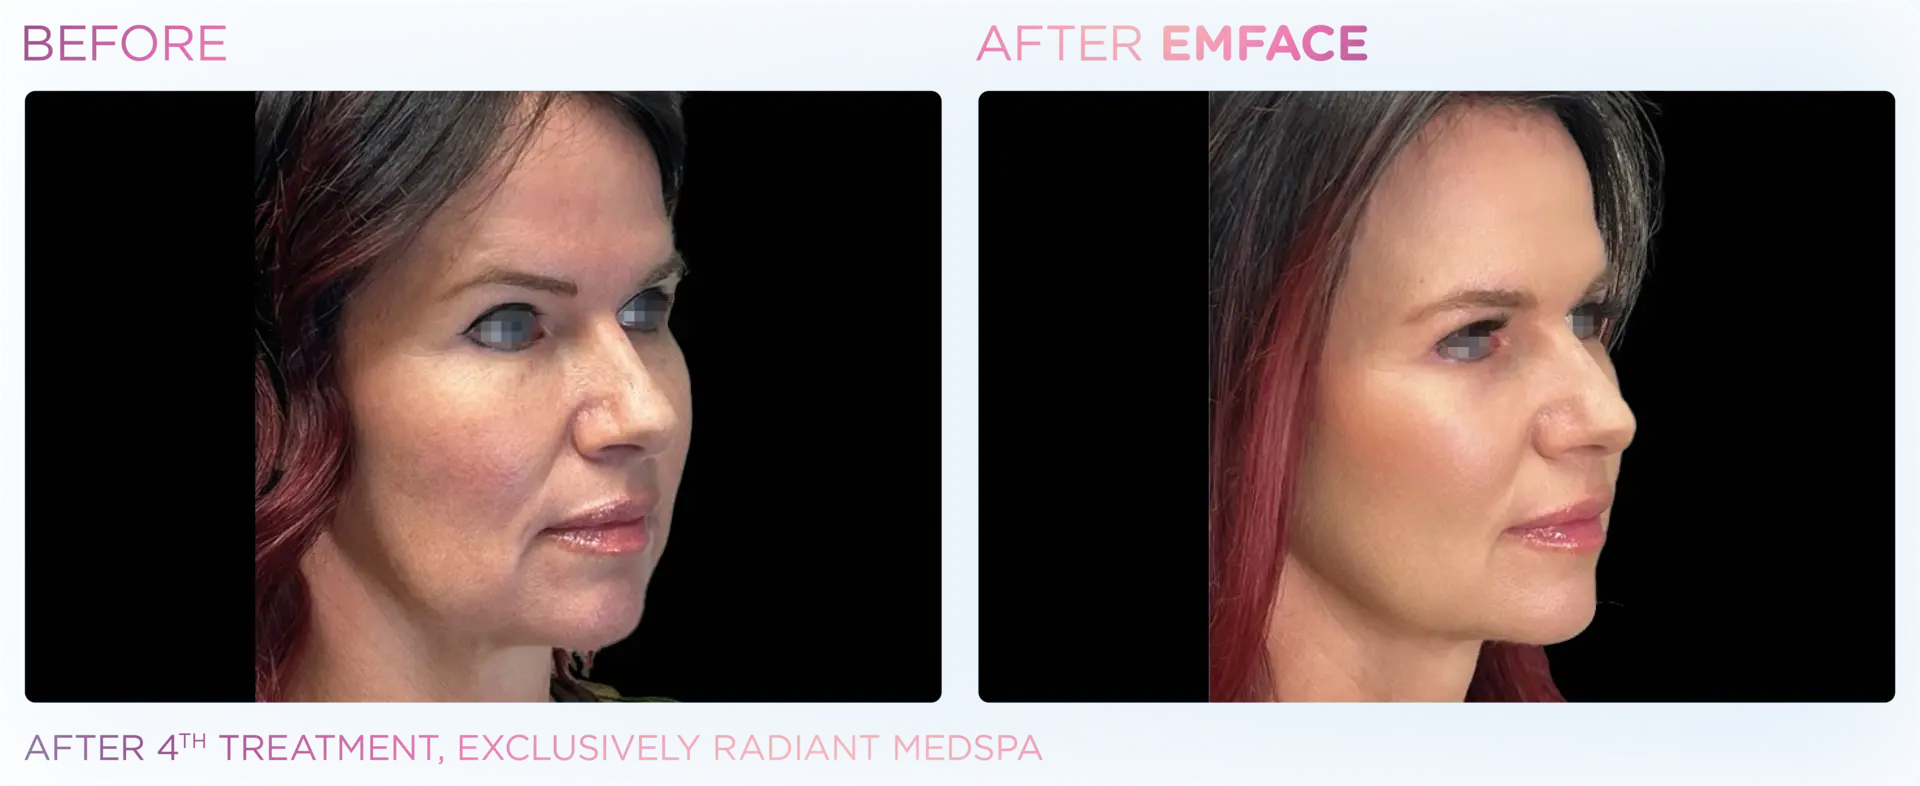 EMFACE Profile - Before and After